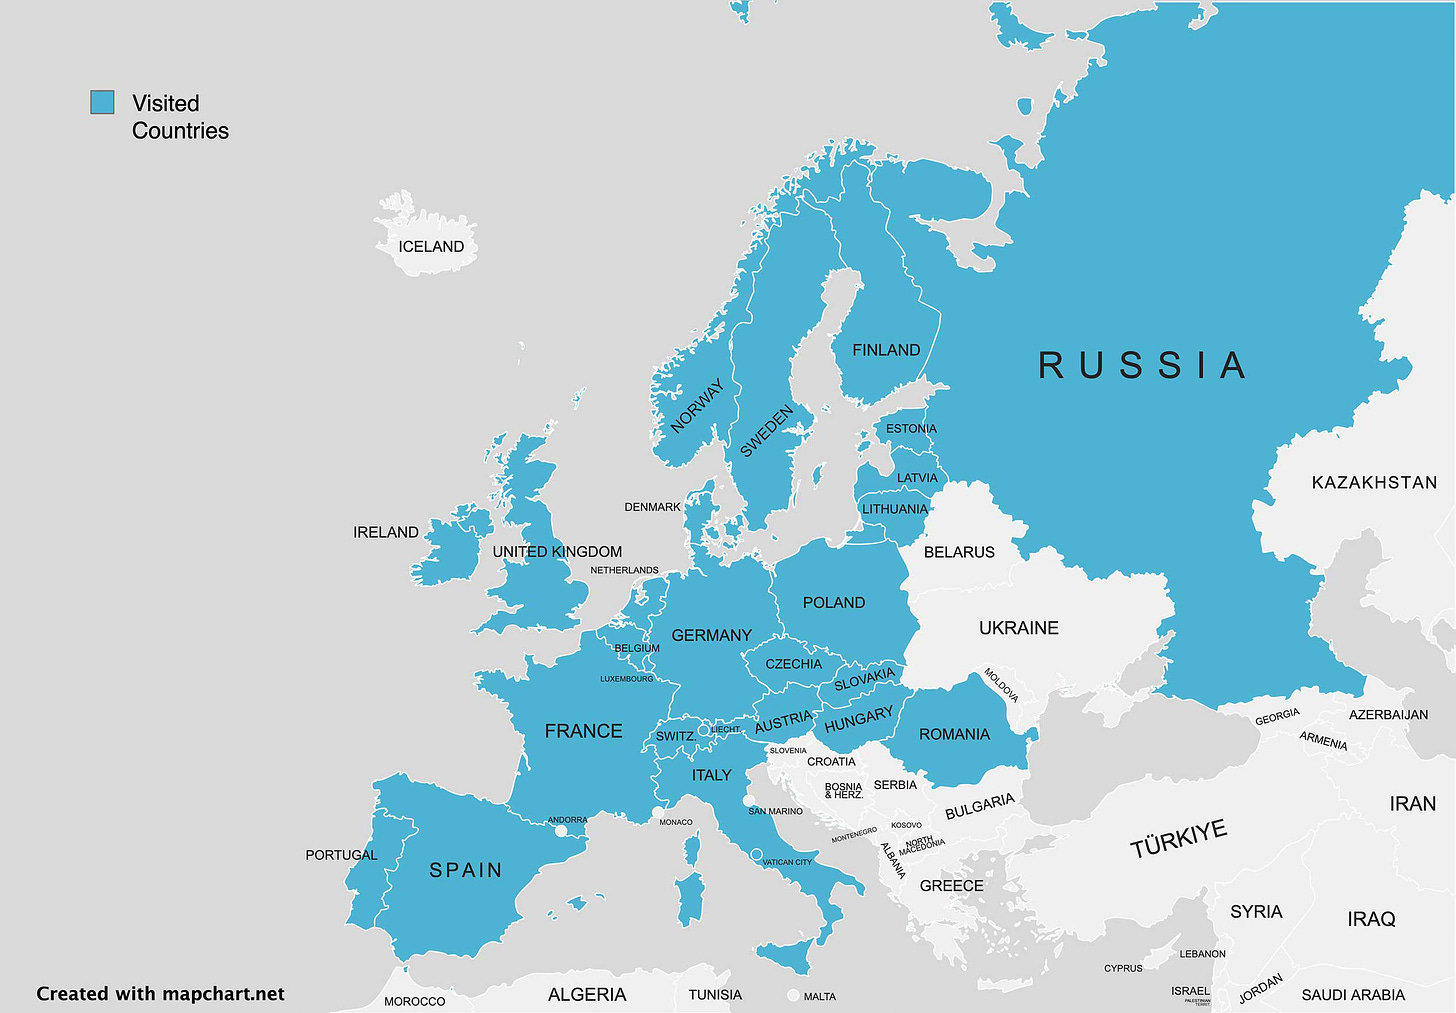 Map of countries visited in Europe.